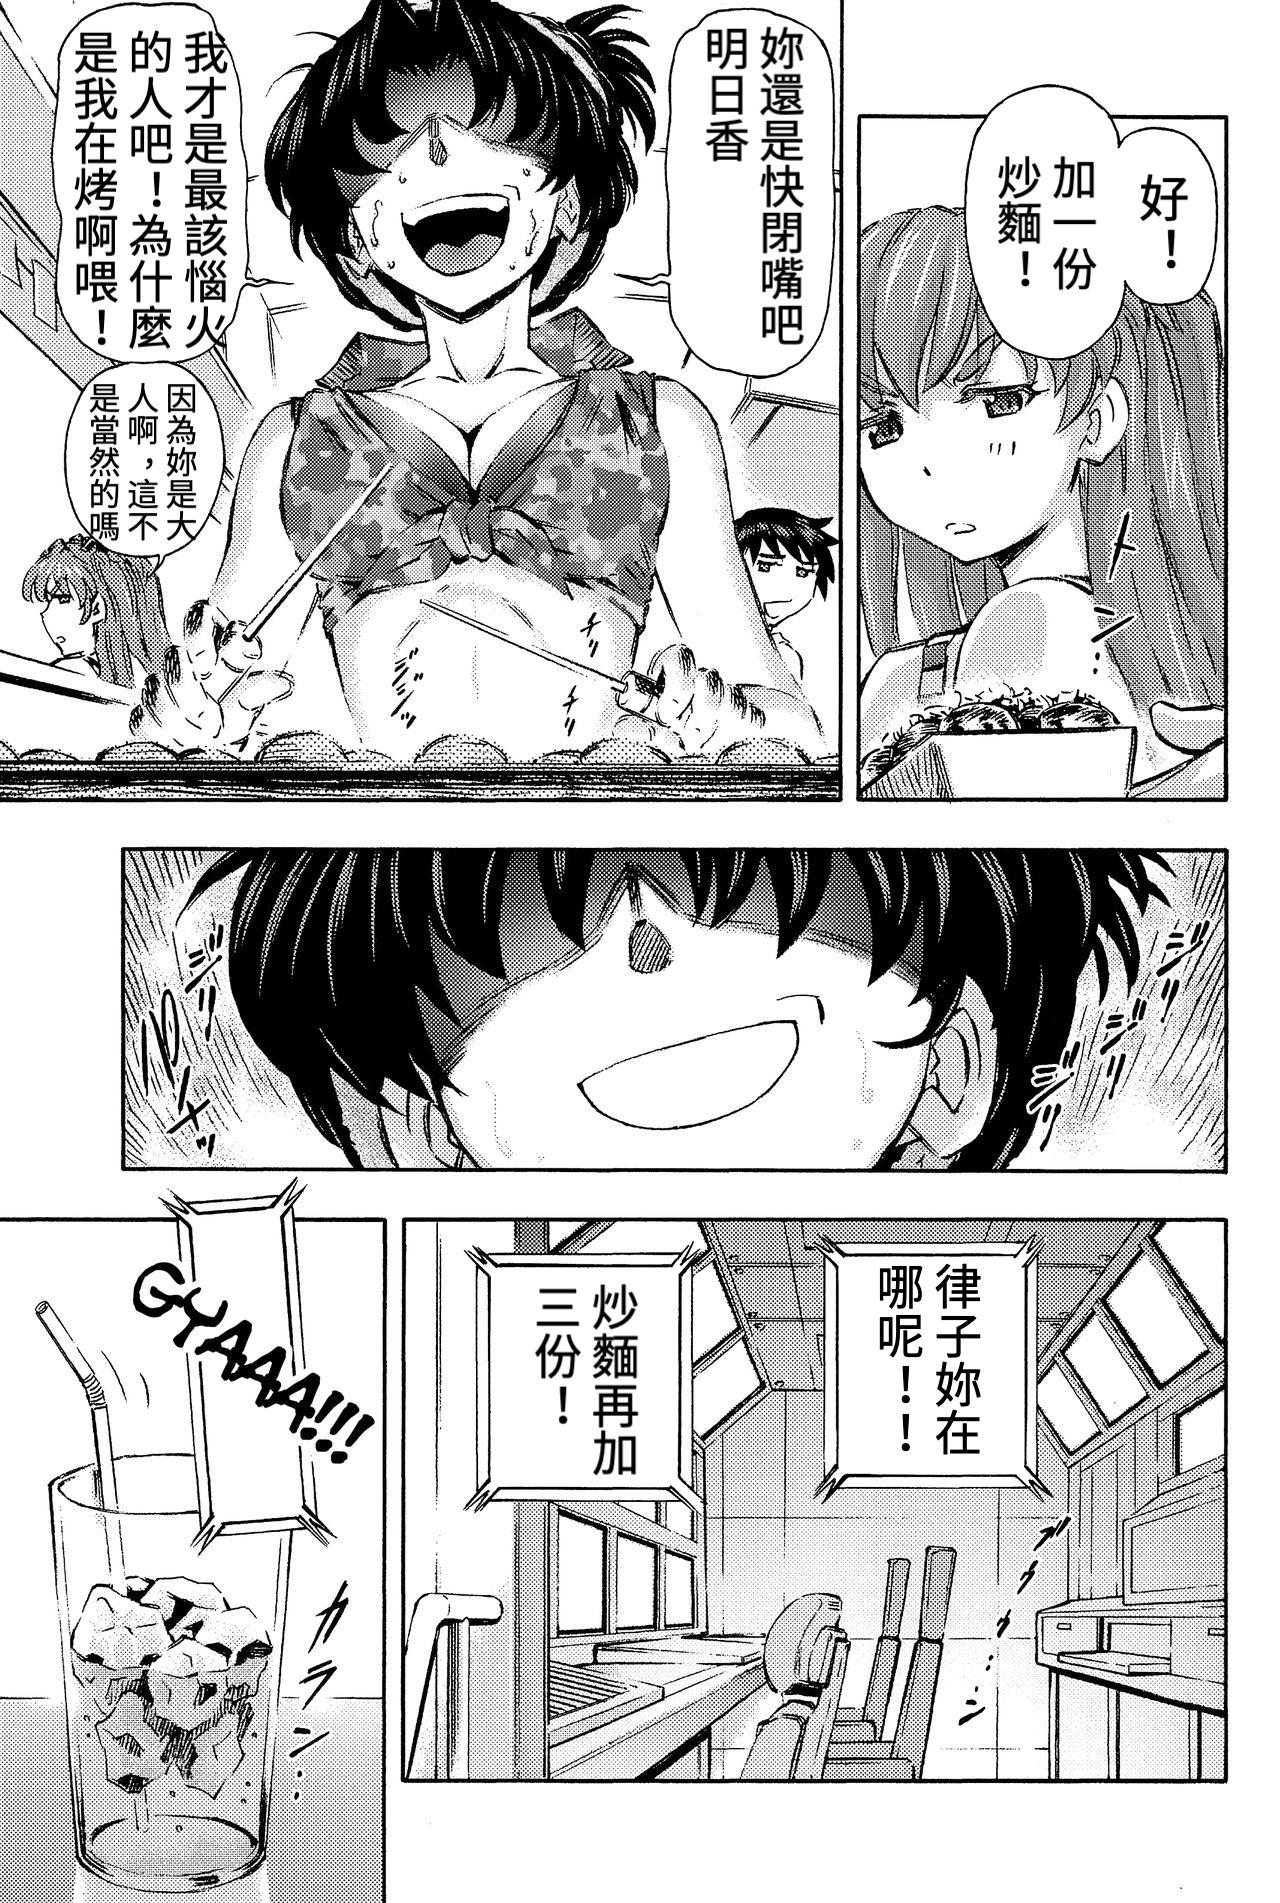 Amature Sex Tapes 3-nin Musume to Umi no Ie - Neon genesis evangelion First - Page 4